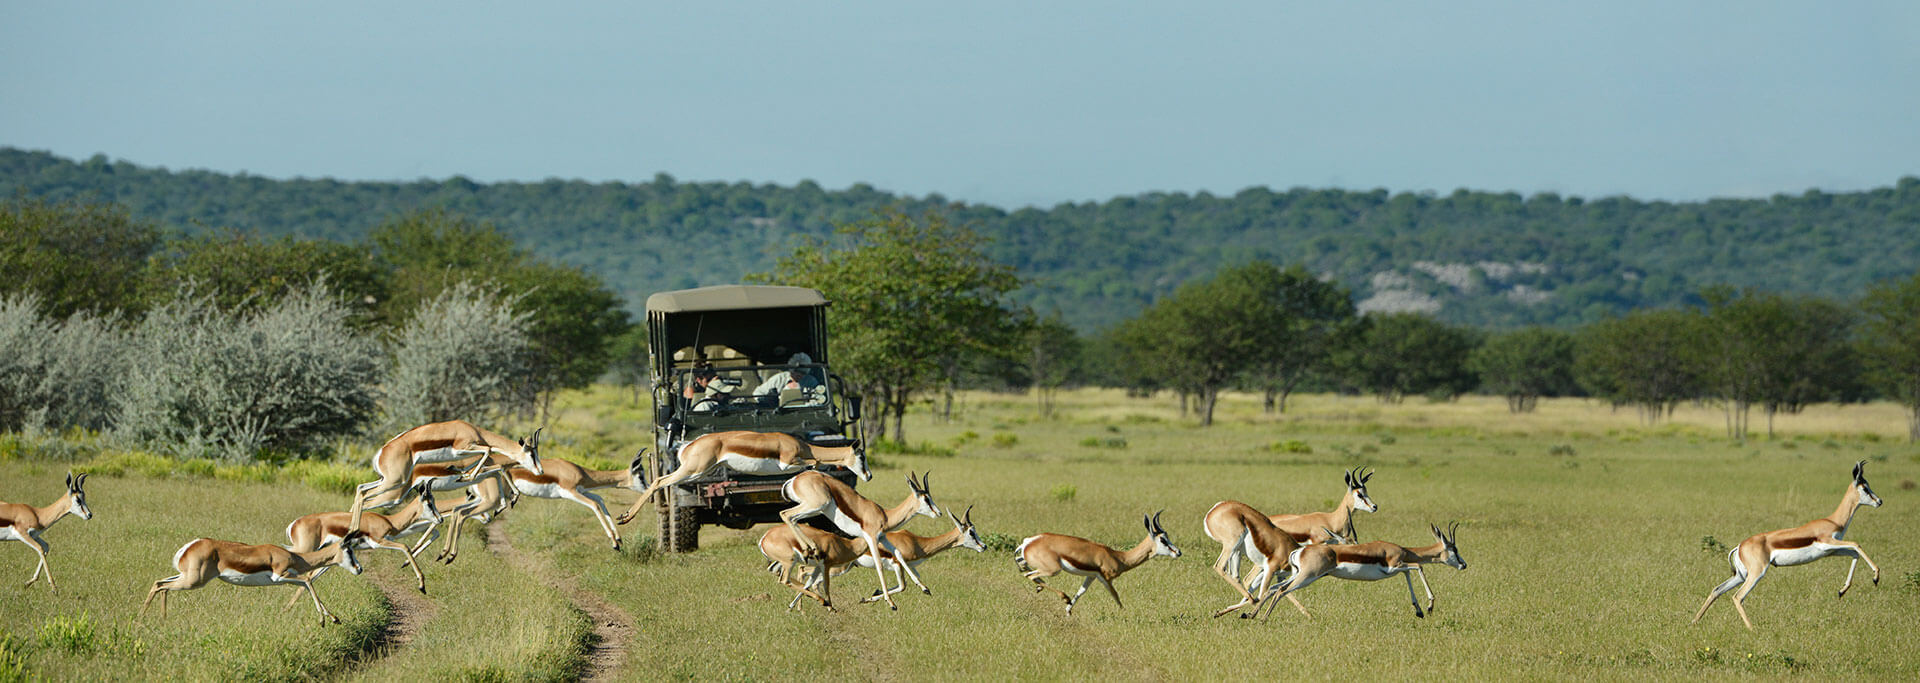 Herd of impala running in front of safari game vehicle